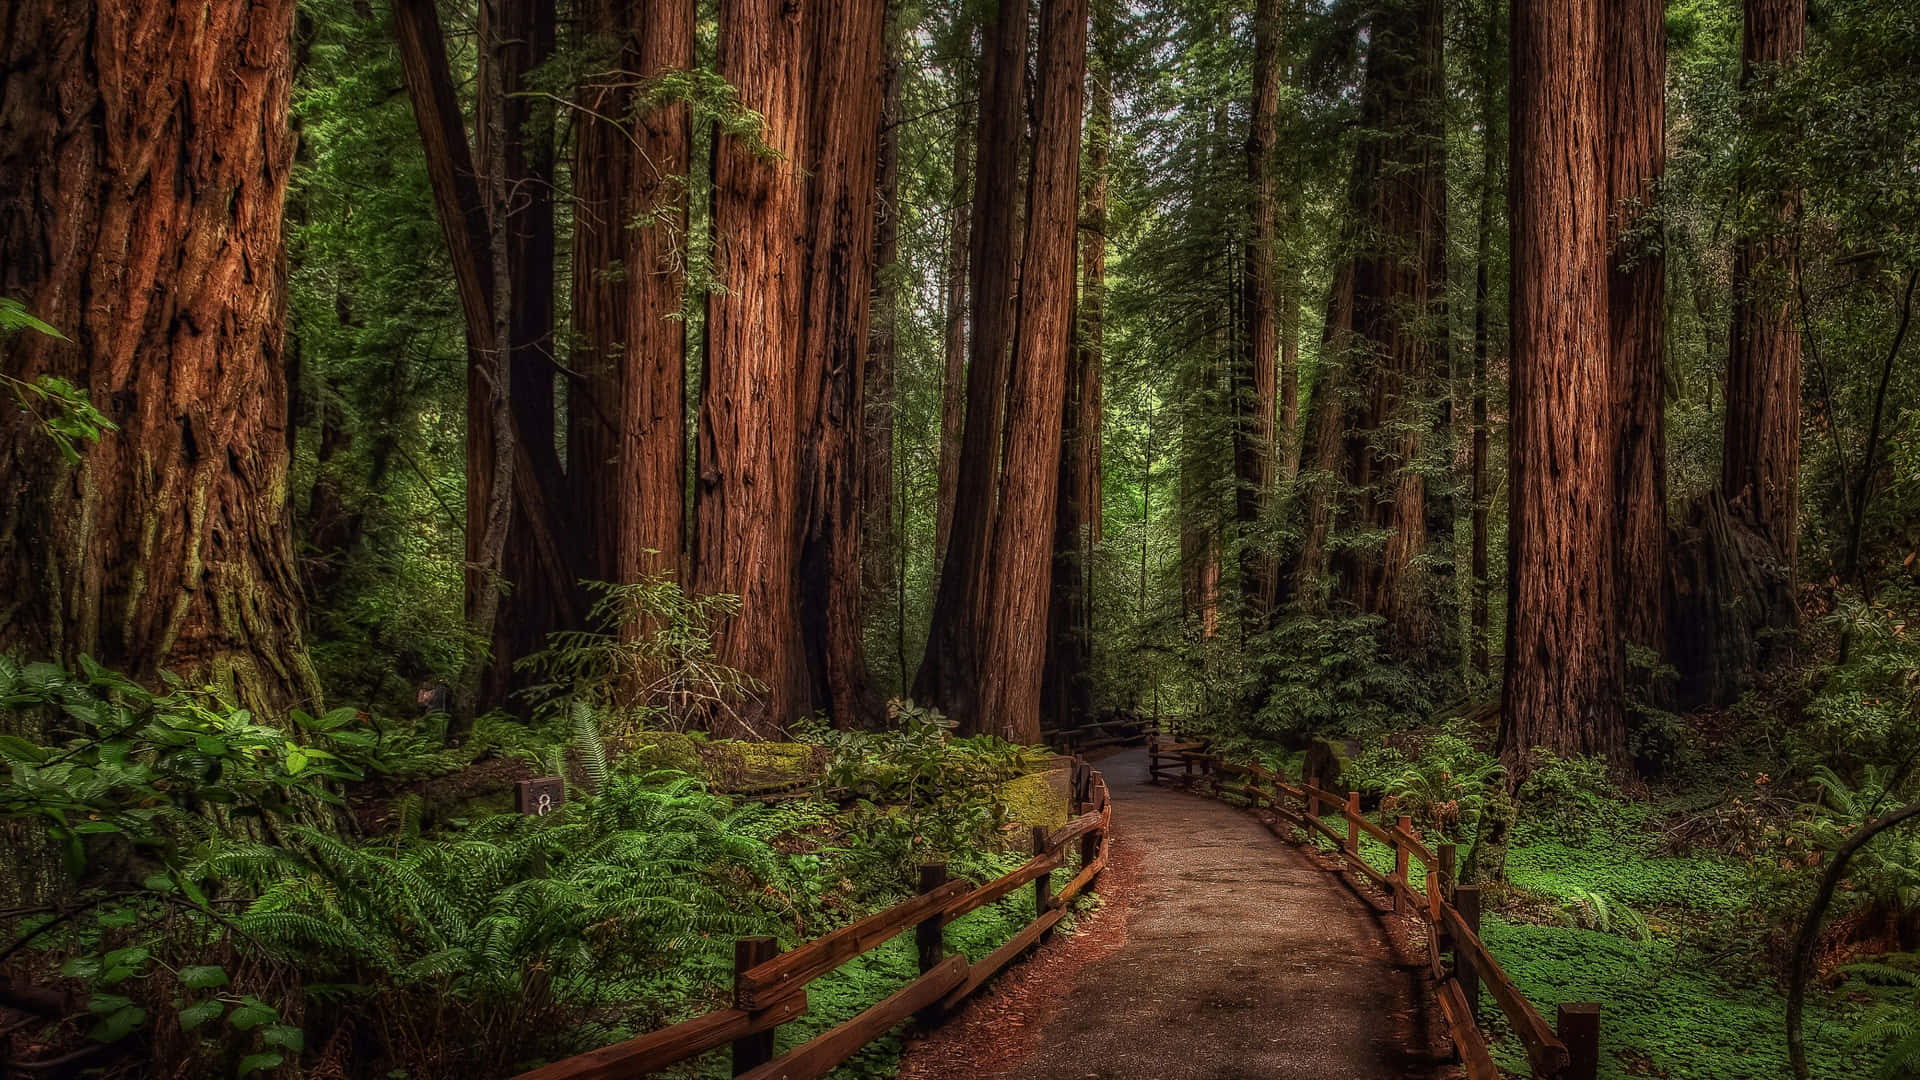 "The Magnificent Redwood Trees"